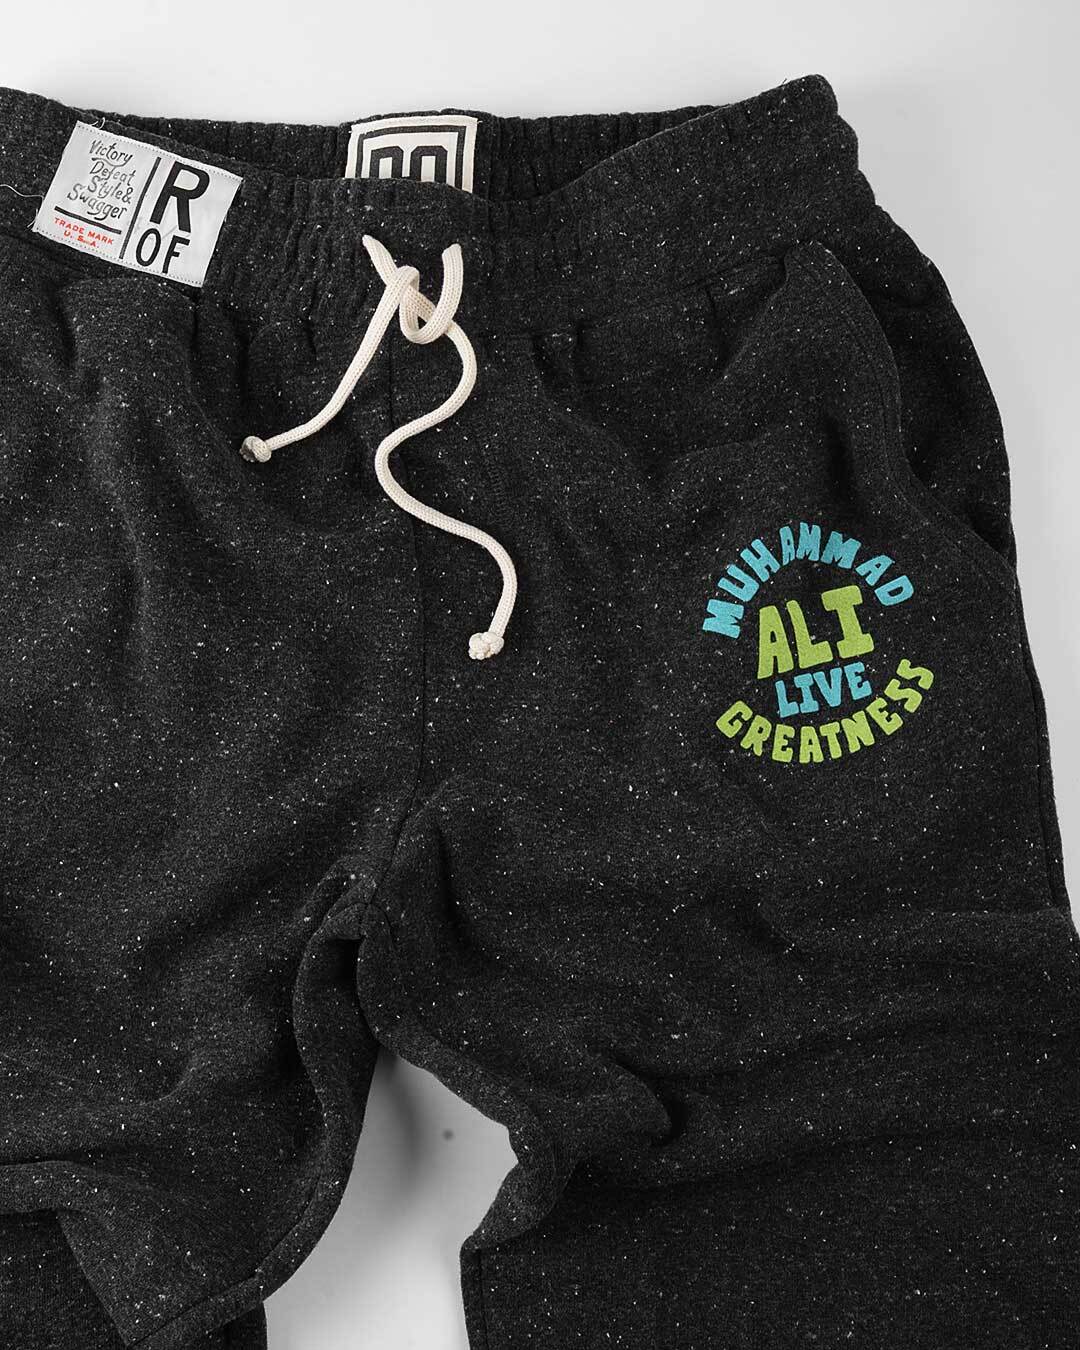 BHT - Ali 'Live Greatness' Black Sweatpants - Roots of Fight Canada